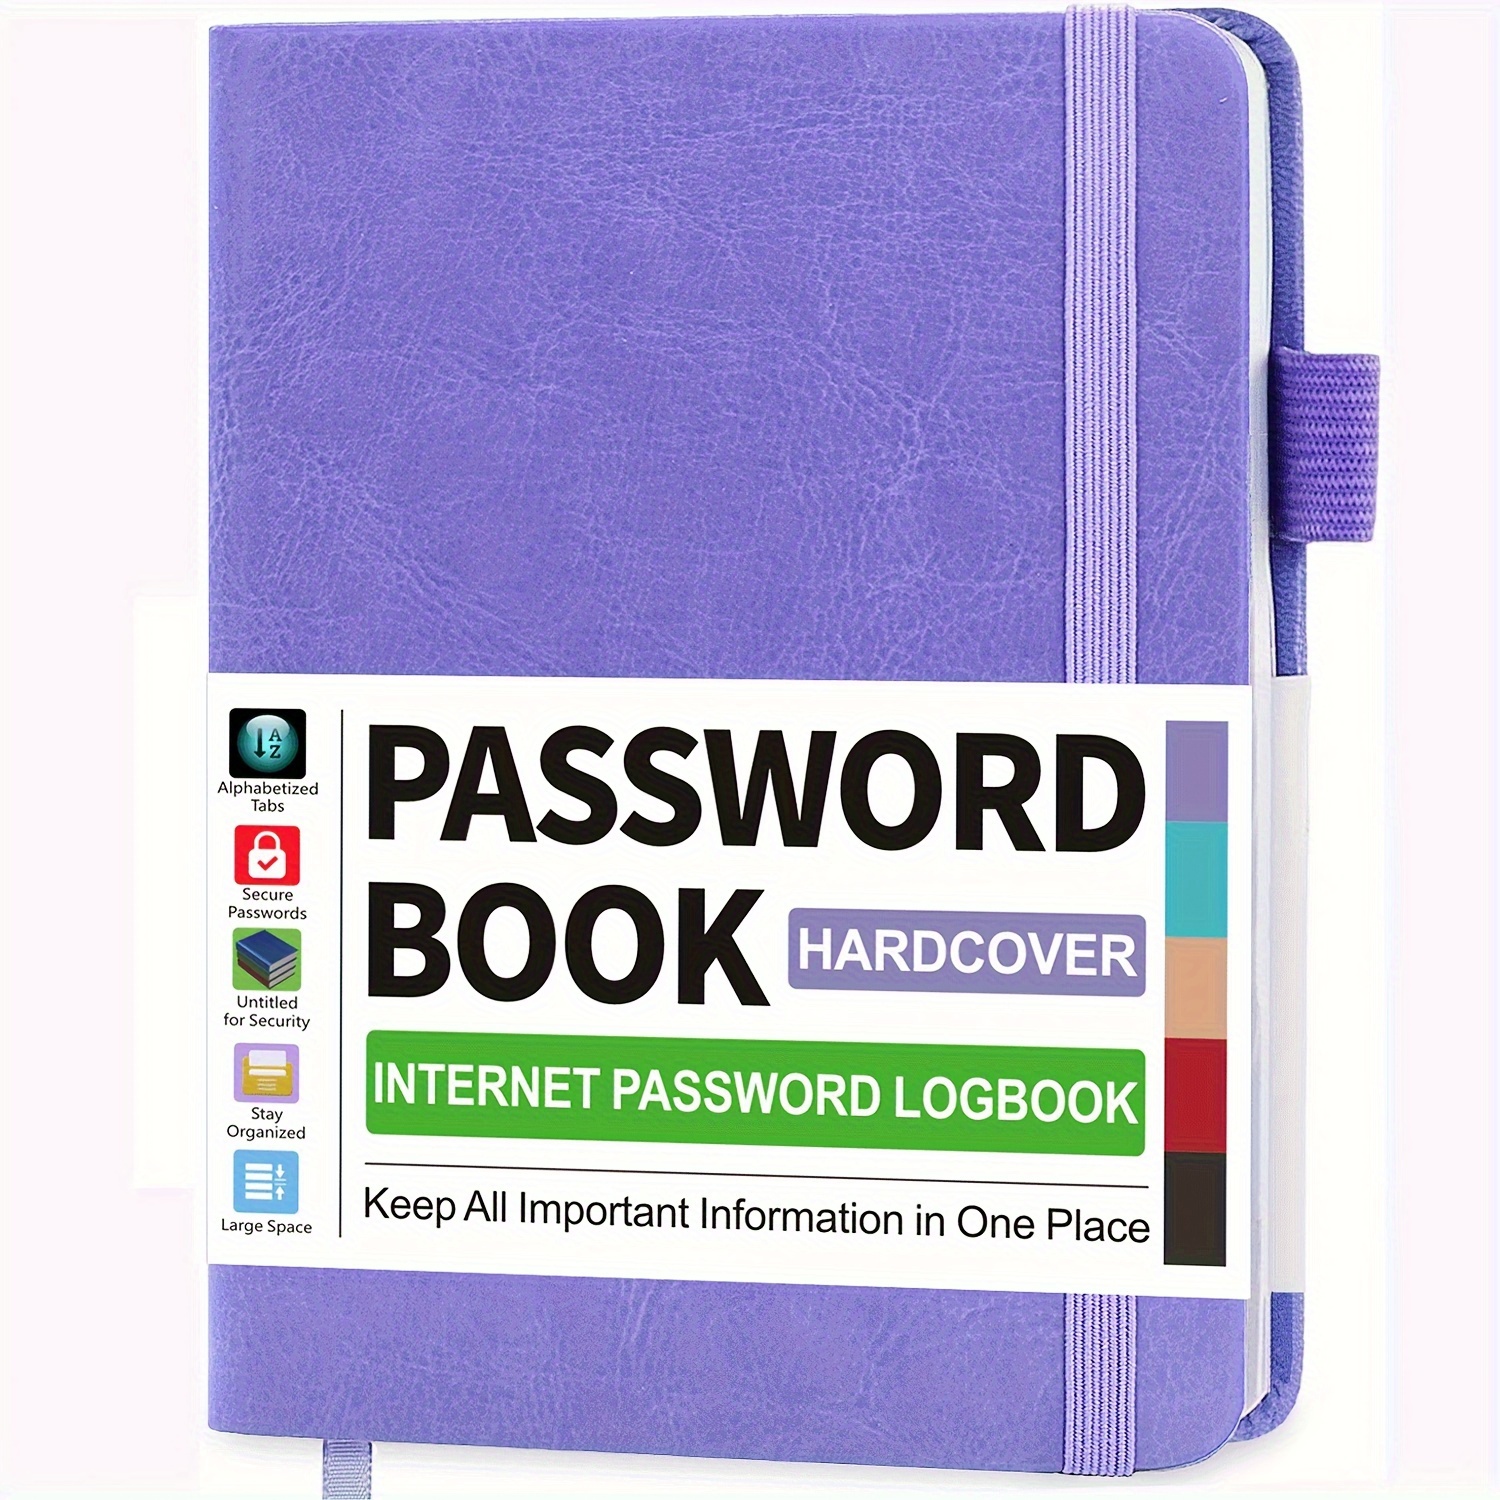 

Honfersm Secure Password Organizer With A-z Tabs - Hardcover, Thick 100gsm Paper, Portable 4.7" X 6.1" Journal For Internet Logins & Addresses